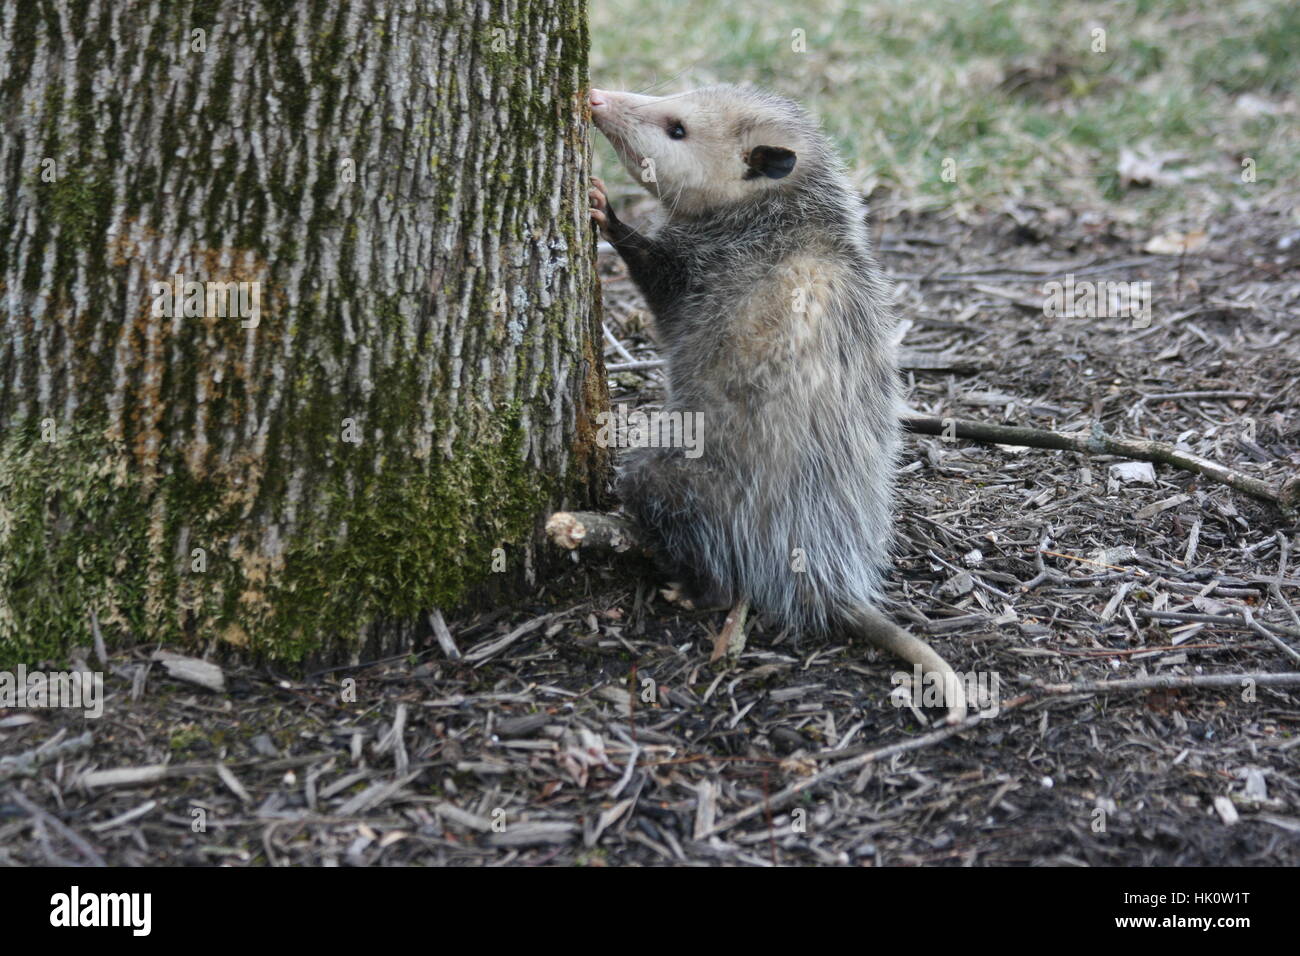 Cute gray opossum with beady black eyes stands in the mulch up against a tree with gray bark and green moss. Stock Photo